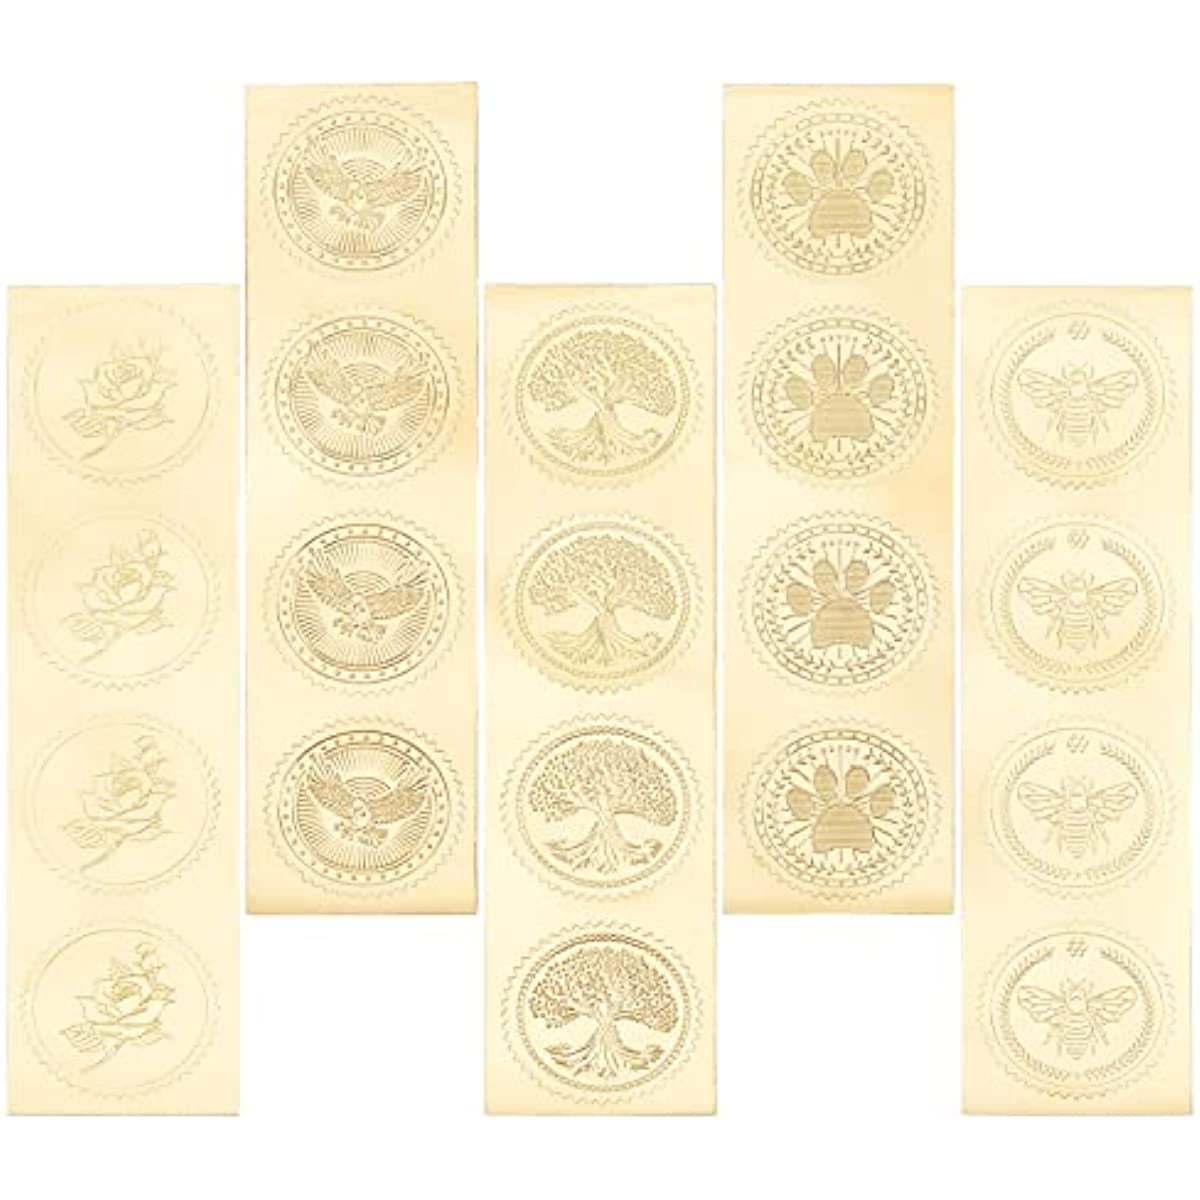  100 Pieces Embossed Gold Foil Certificate Seals Gold